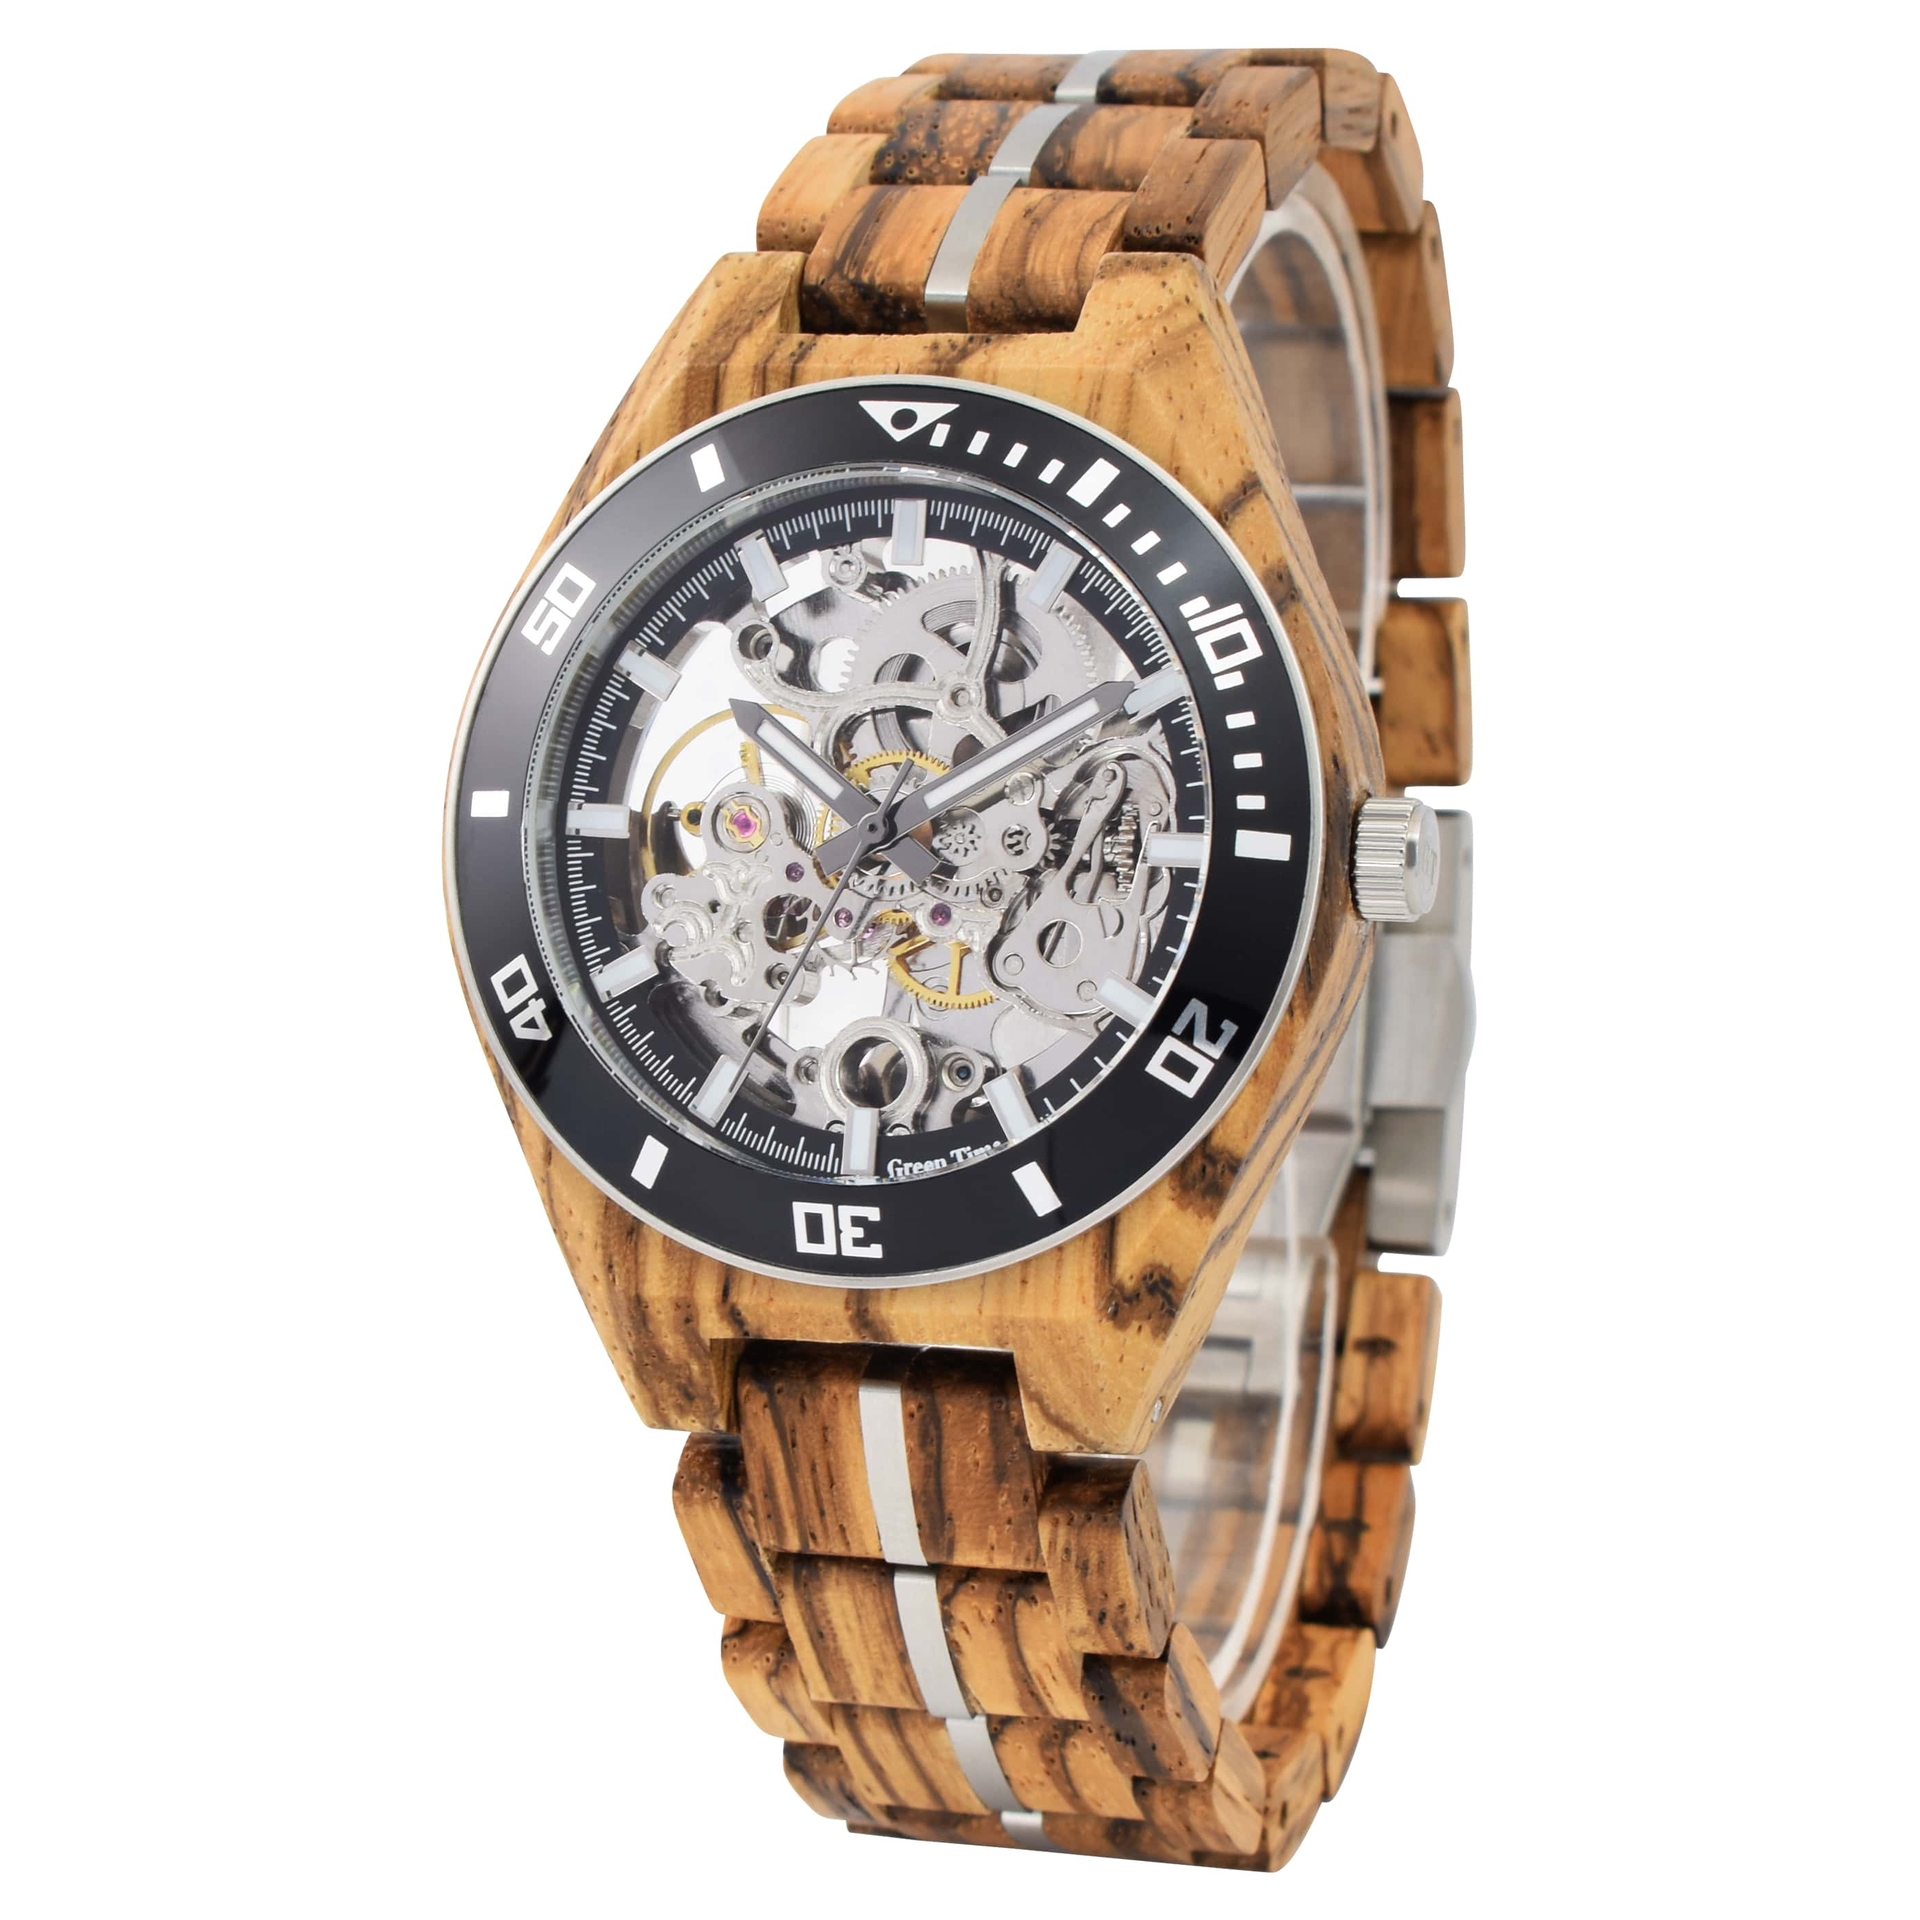 Wooden watch for men - Greentime wood watch